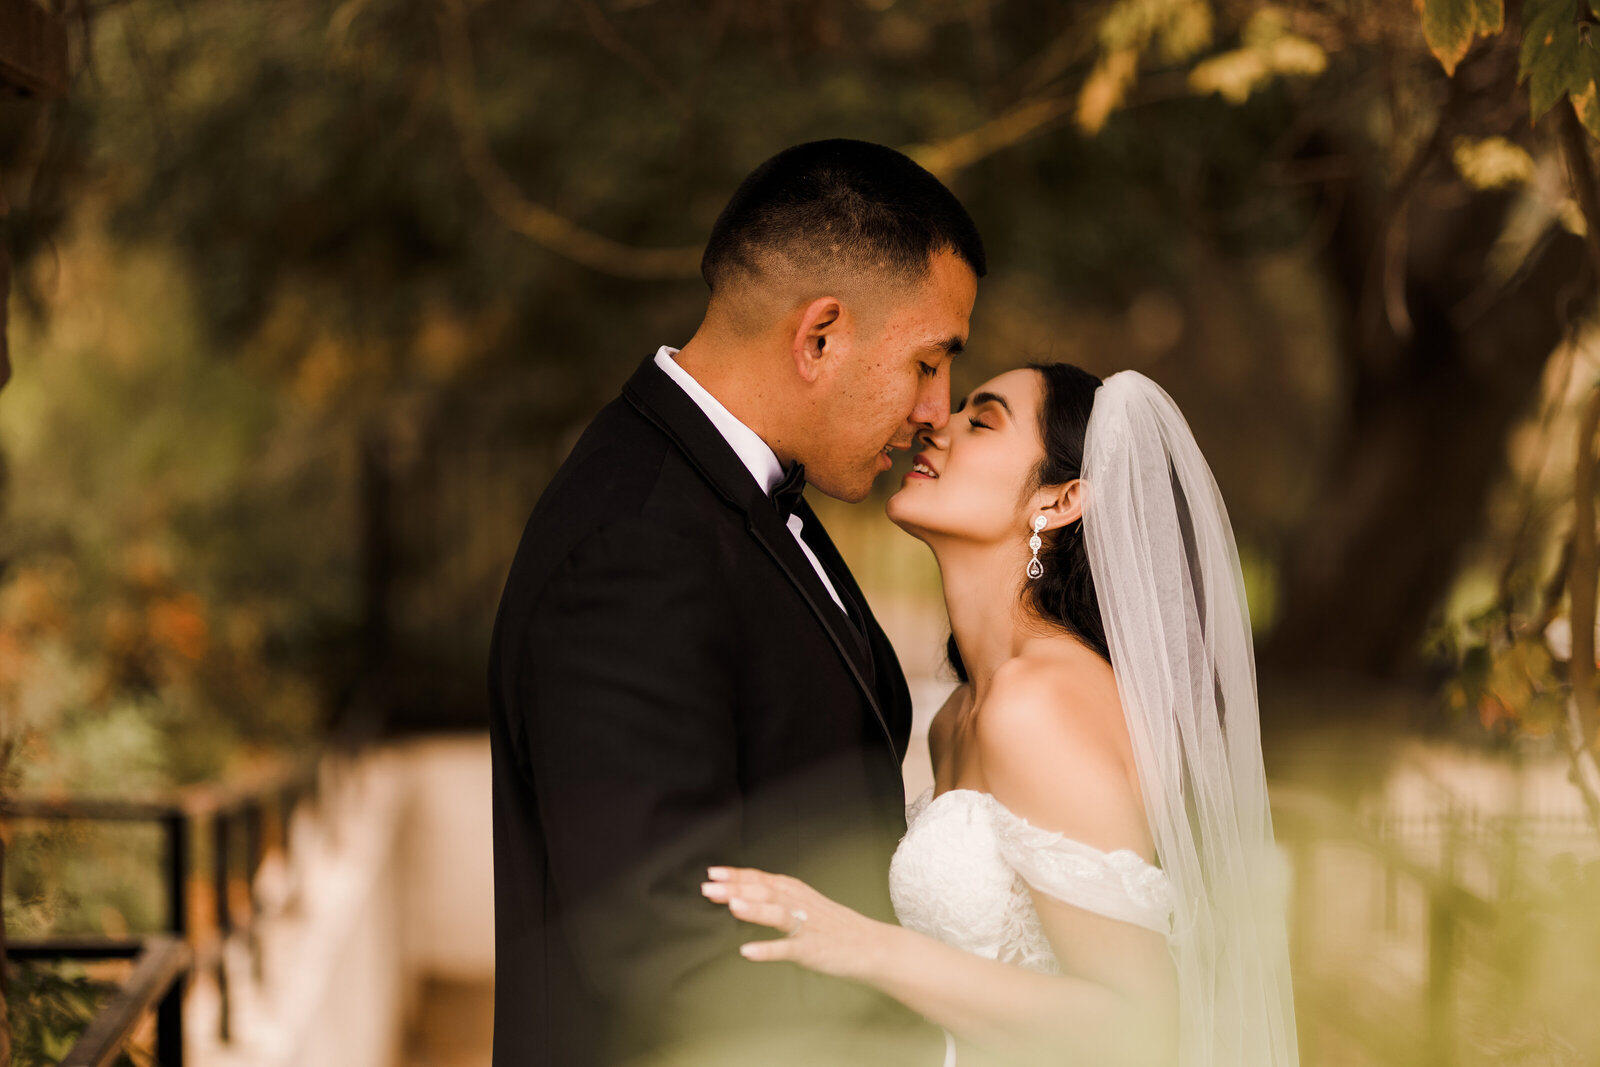 Newly Wed Portraits at Hillcrest Park in Fullerton Ca